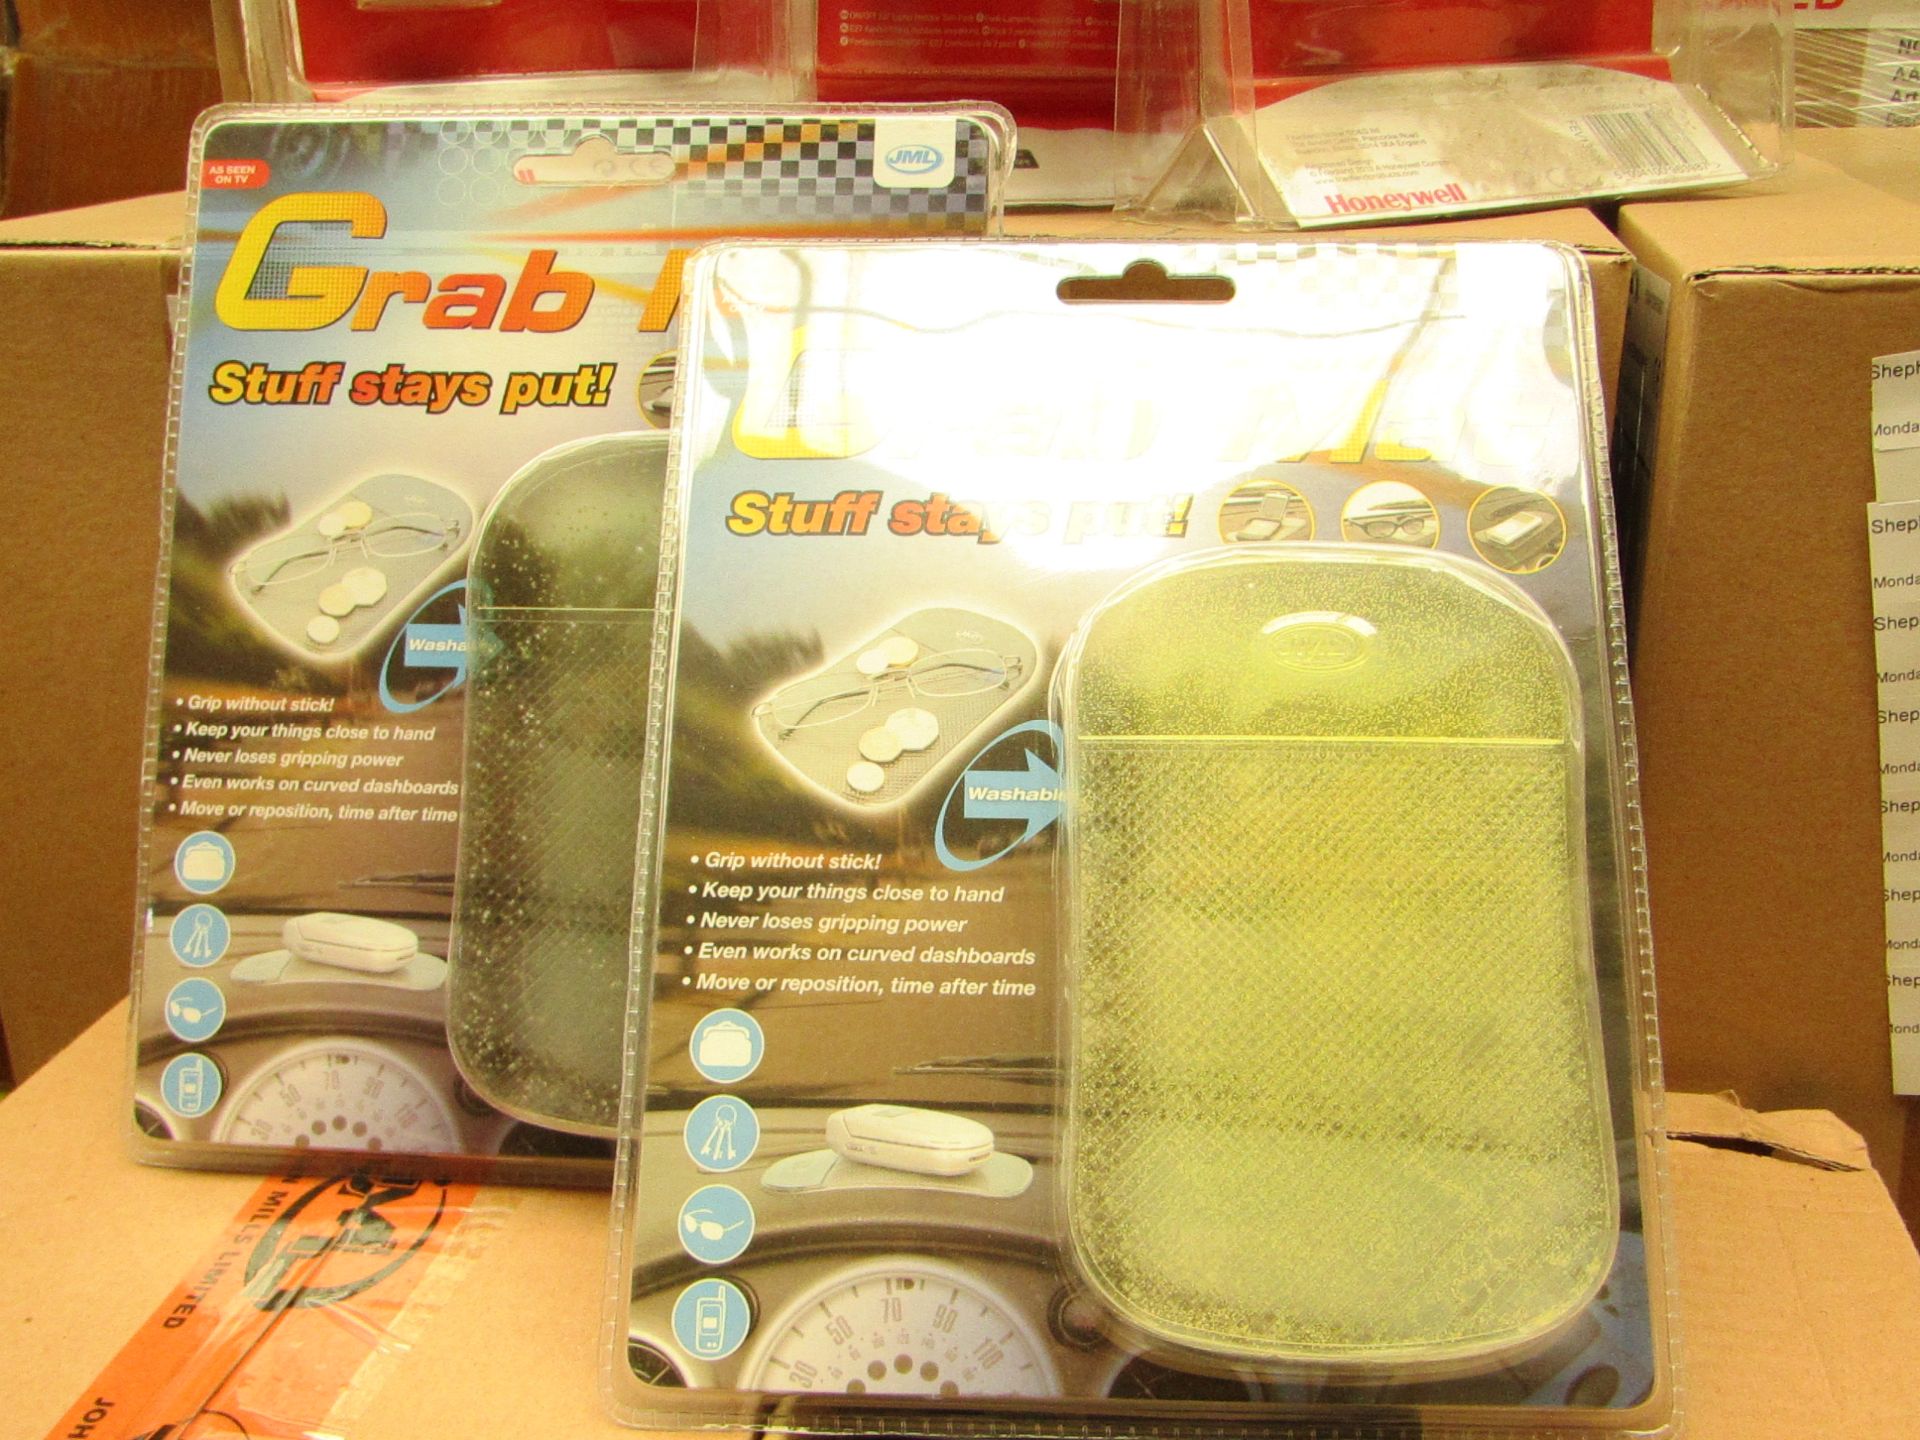 12x JML grab mats for cars, new and packaged.